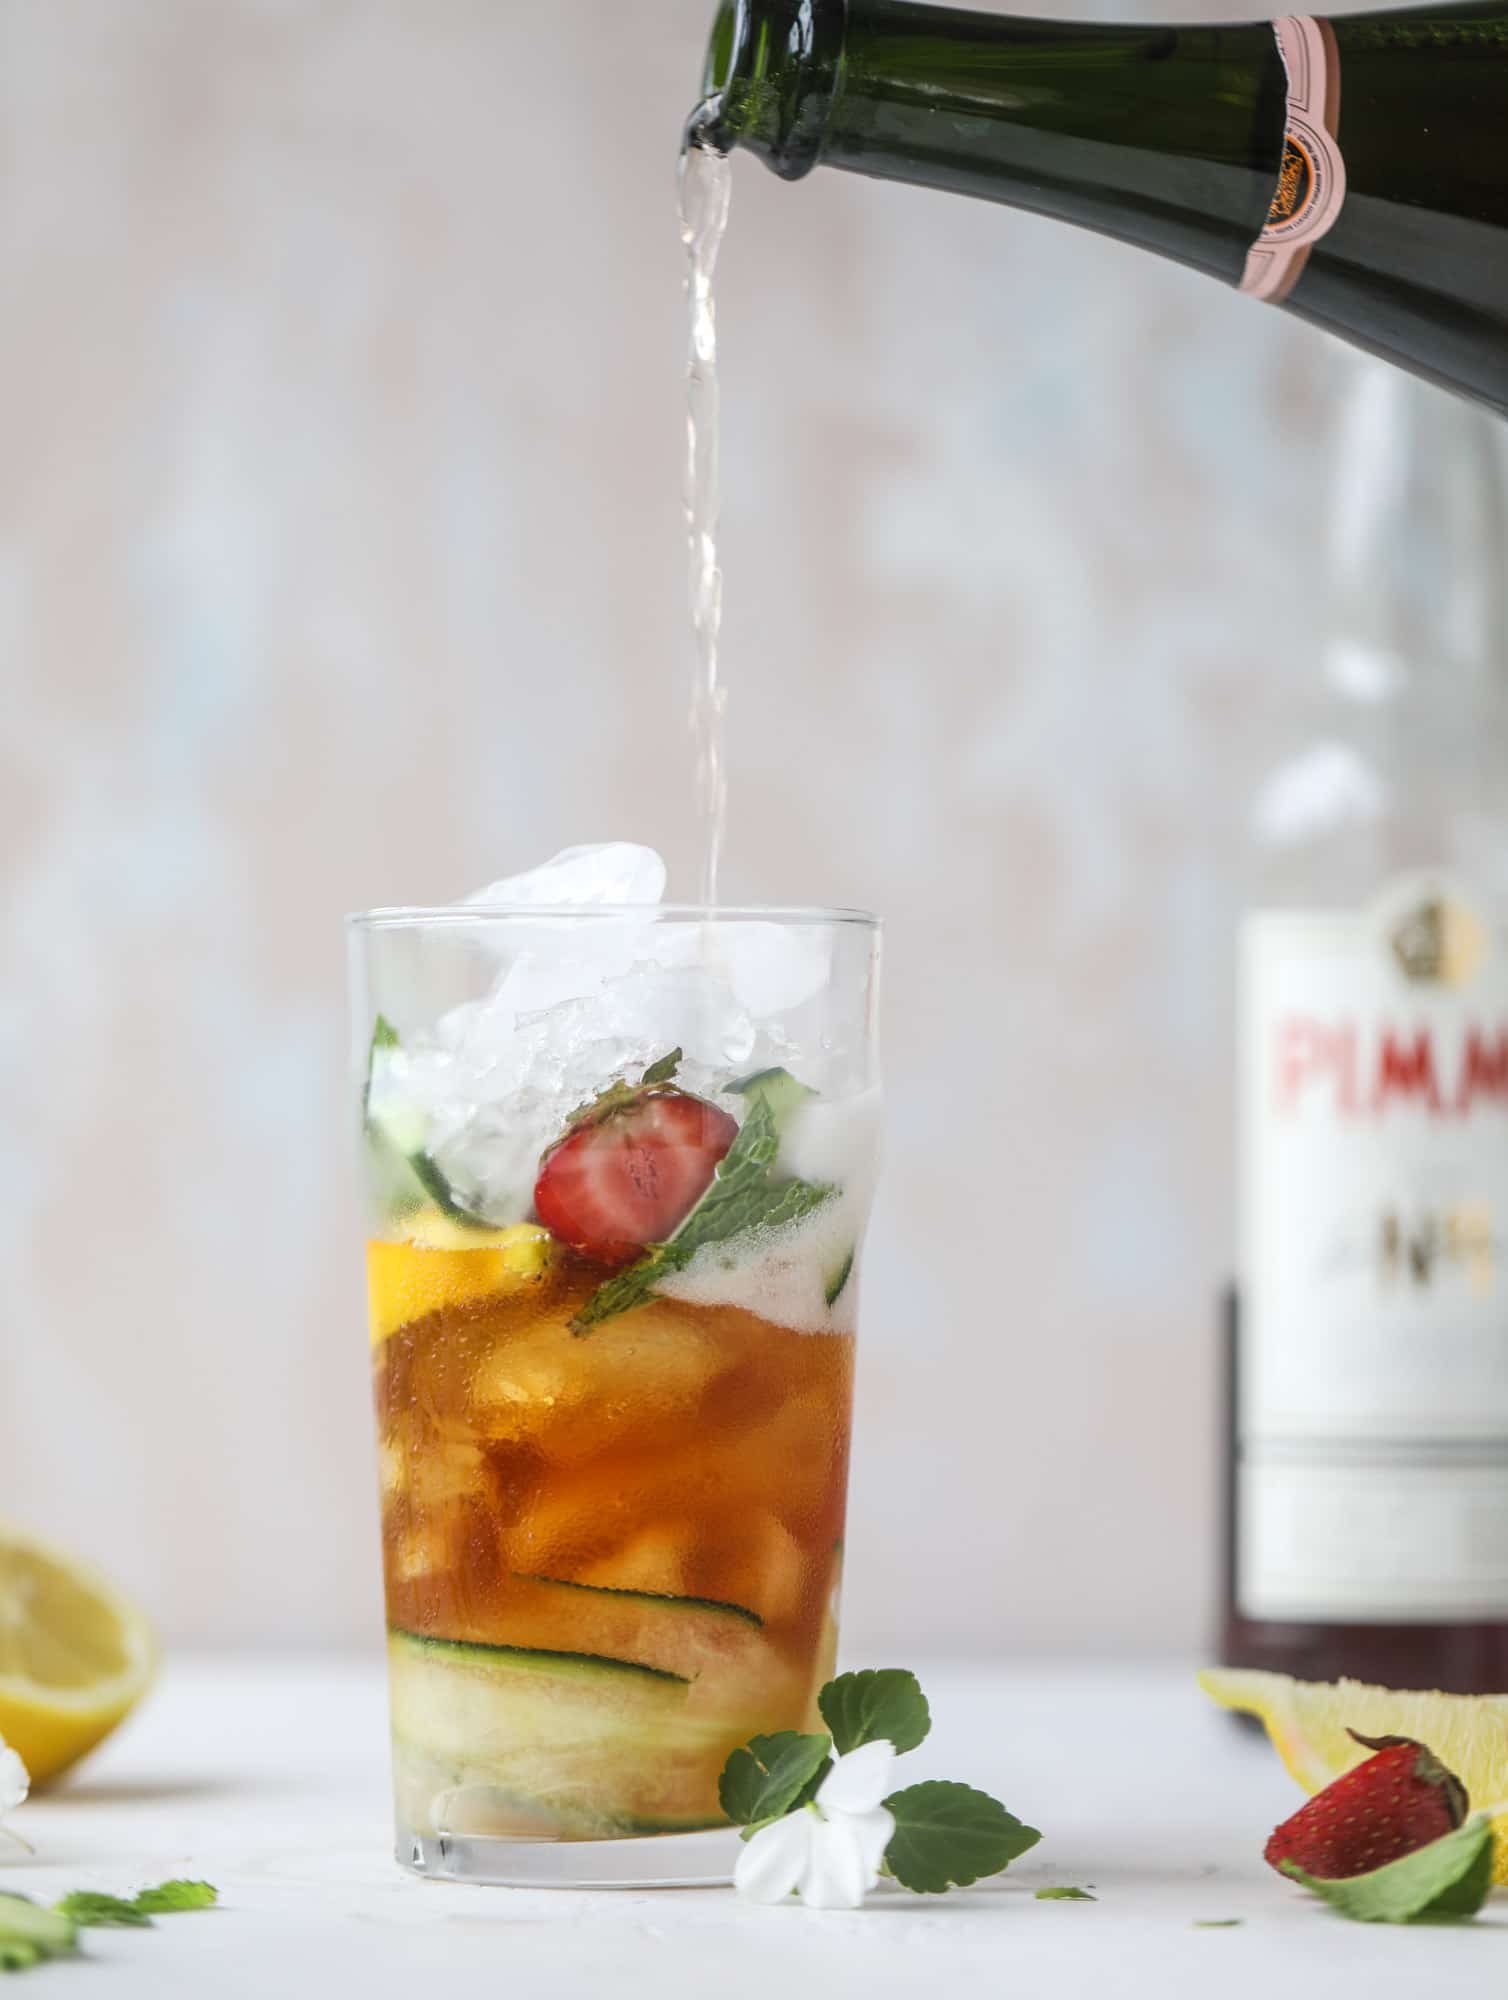 I love a delicious Pimm's Cup in the heart of summer! This was is topped with sparkling rosé wine and filled with strawberries, cucumbers and lemon wedges. It's super refreshing and perfect on hot hot days! I howsweeteats.com #pimms #cup #recipe #cocktails #rosé #sparkling #summer